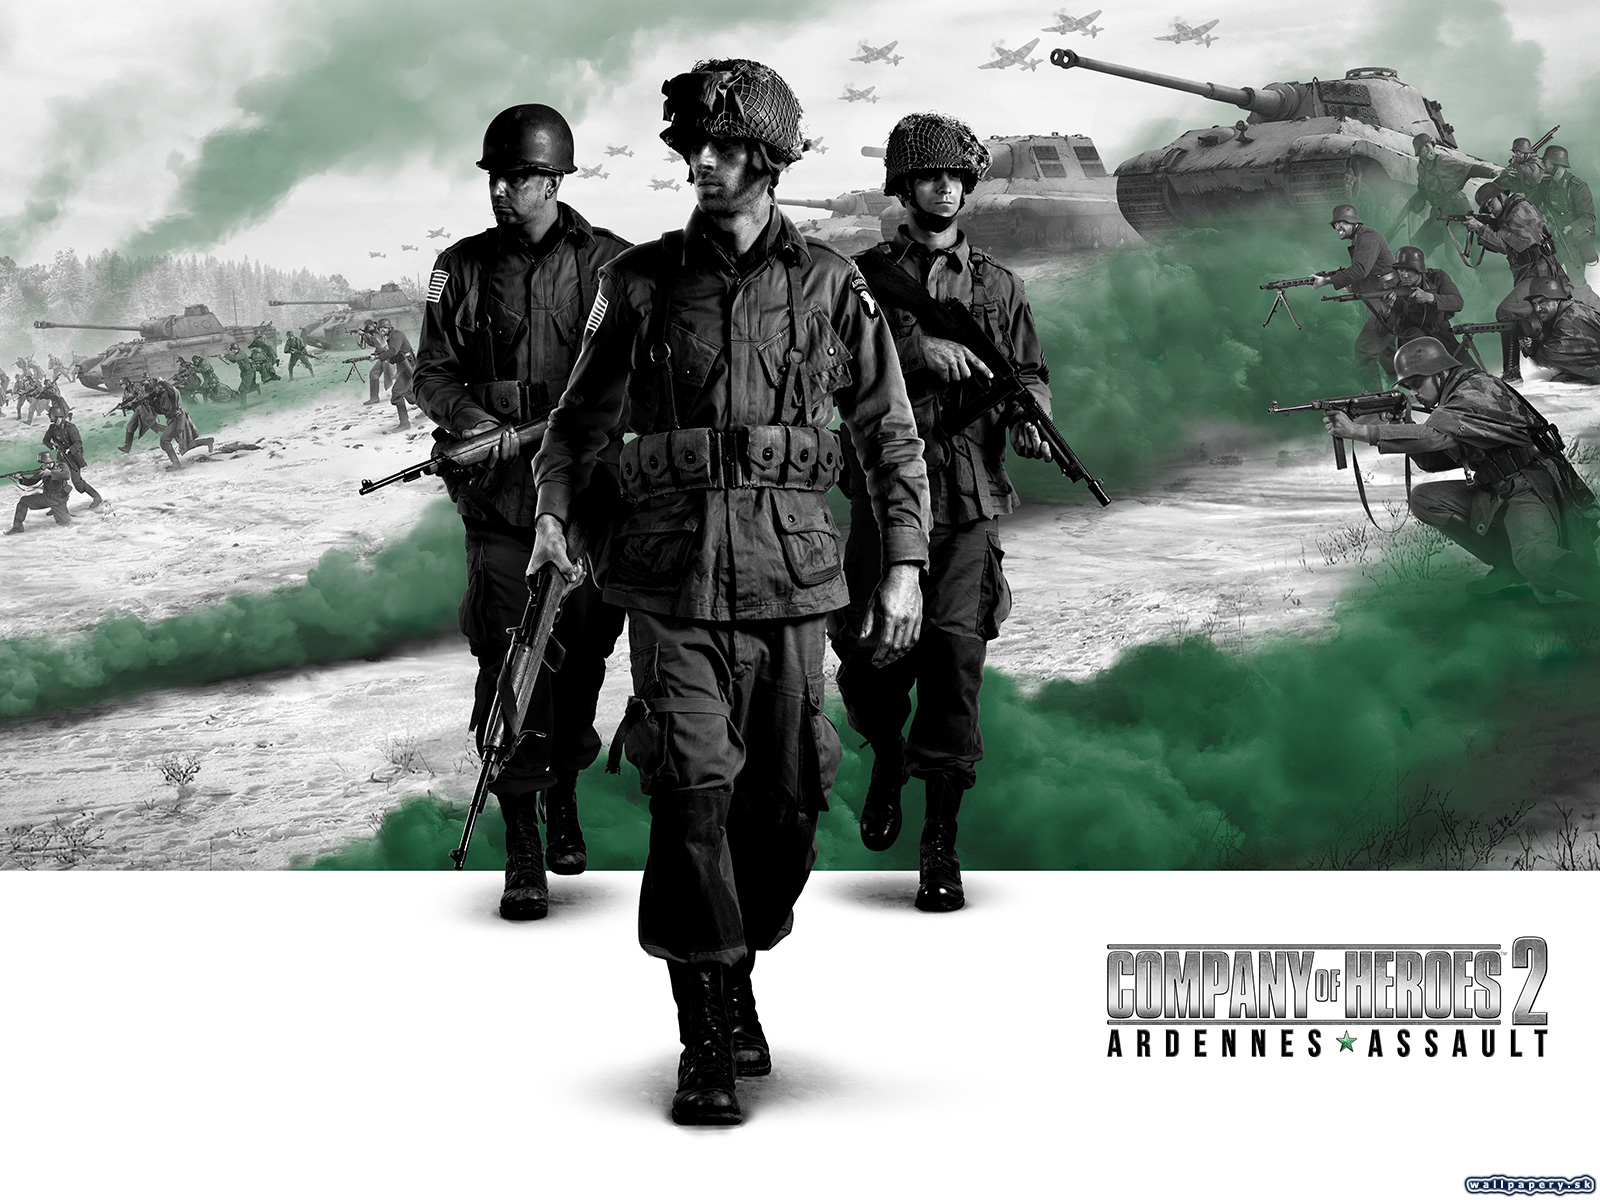 Company of Heroes 2: Ardennes Assault - wallpaper 1